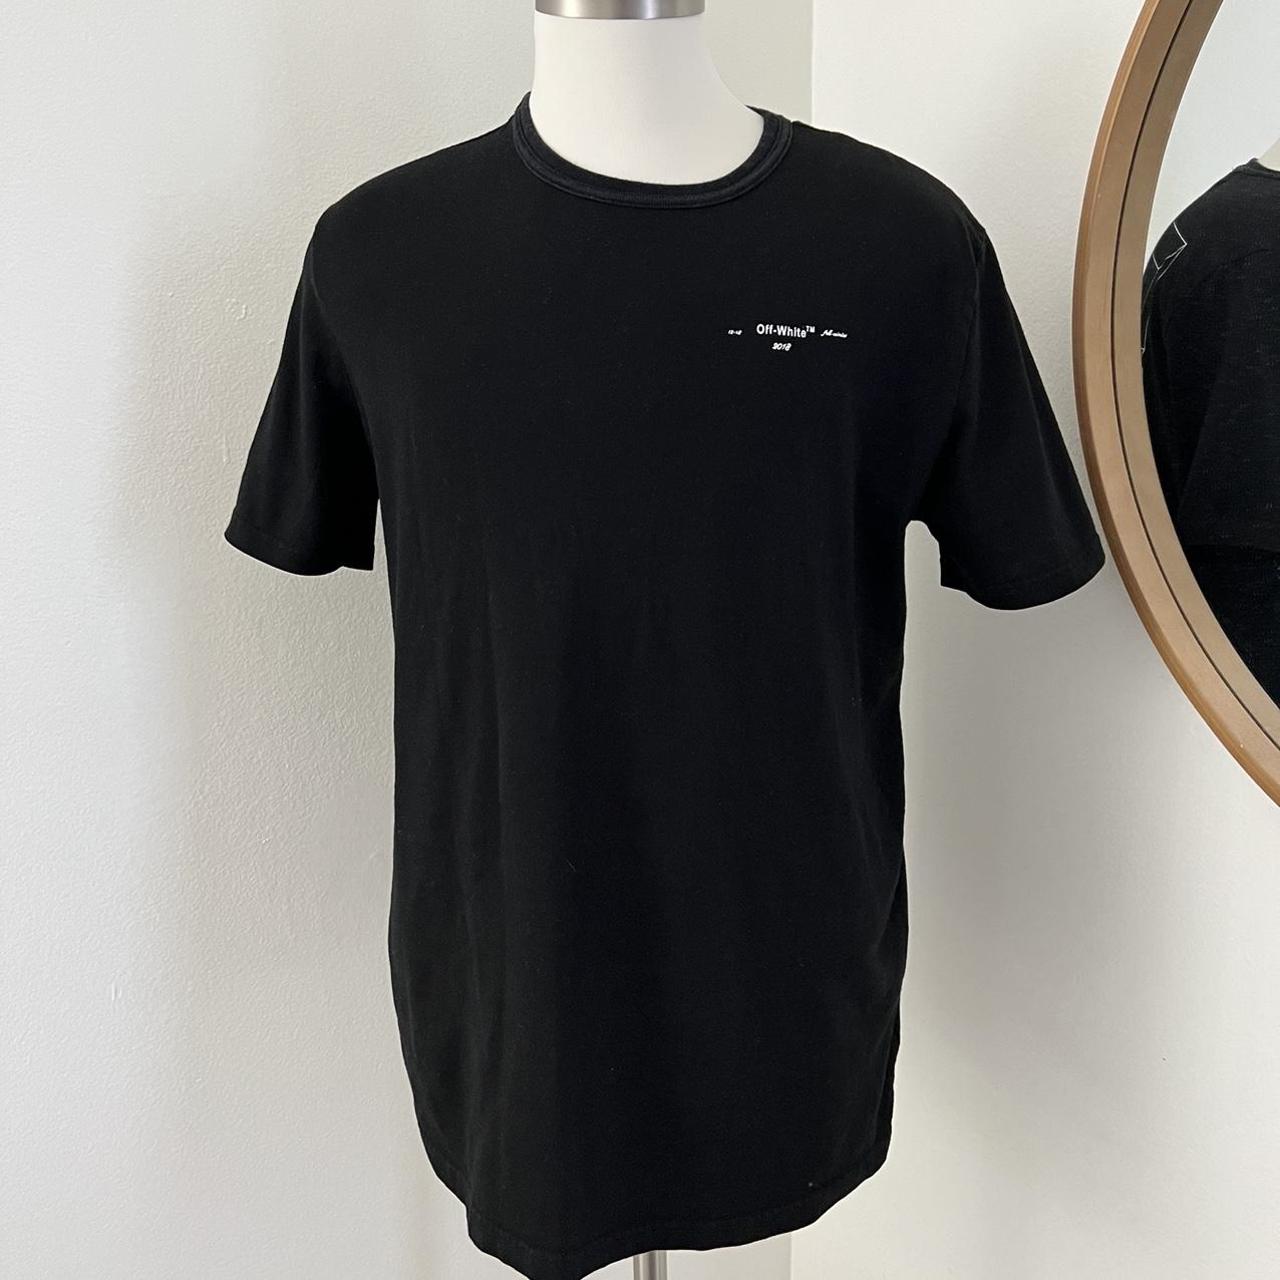 Product Image 2 - OFF-WHITE 2018 printed shirt size